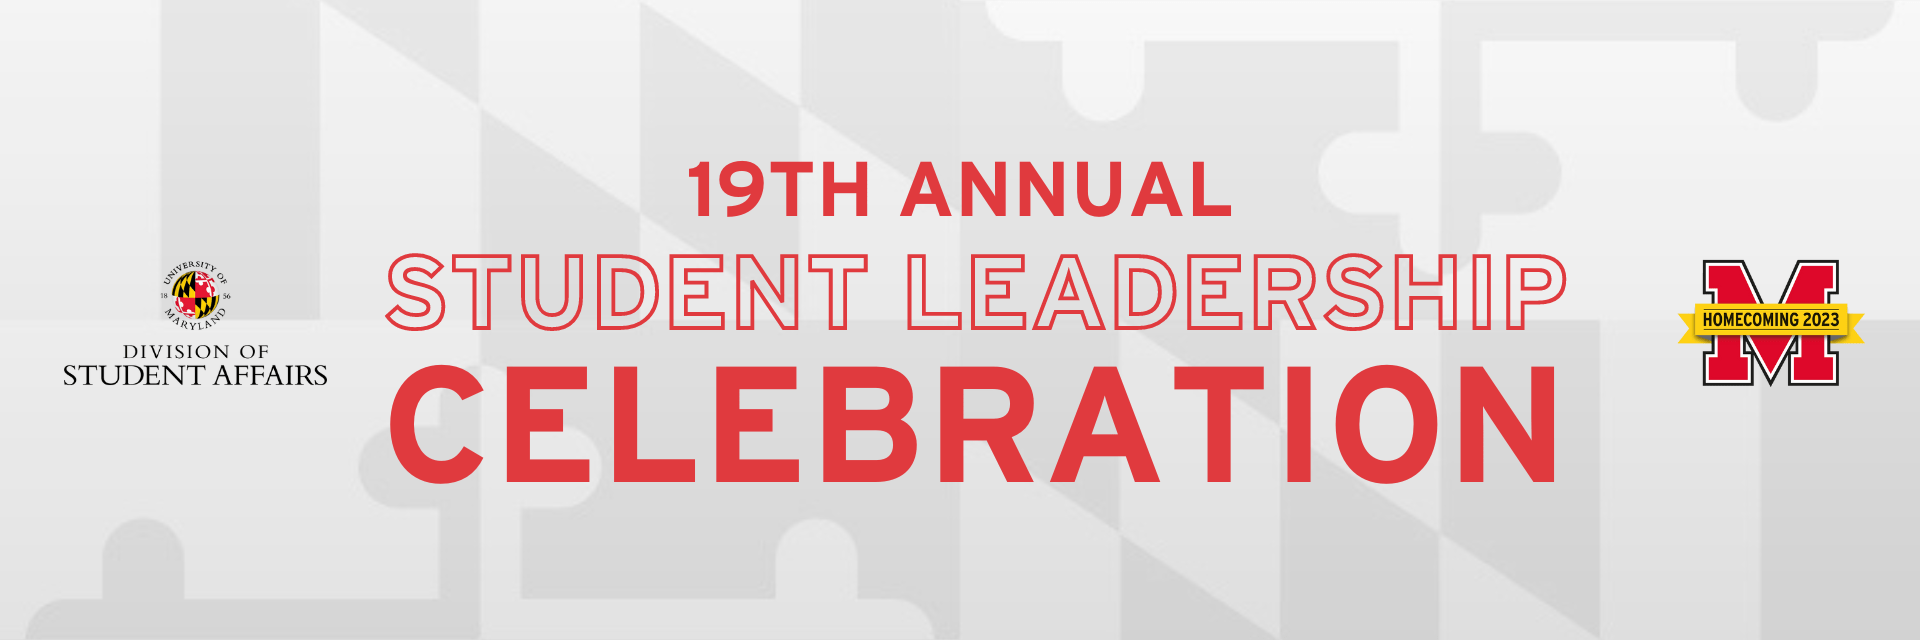 19th Annual Student Leadership Celebration. Red text on white background.